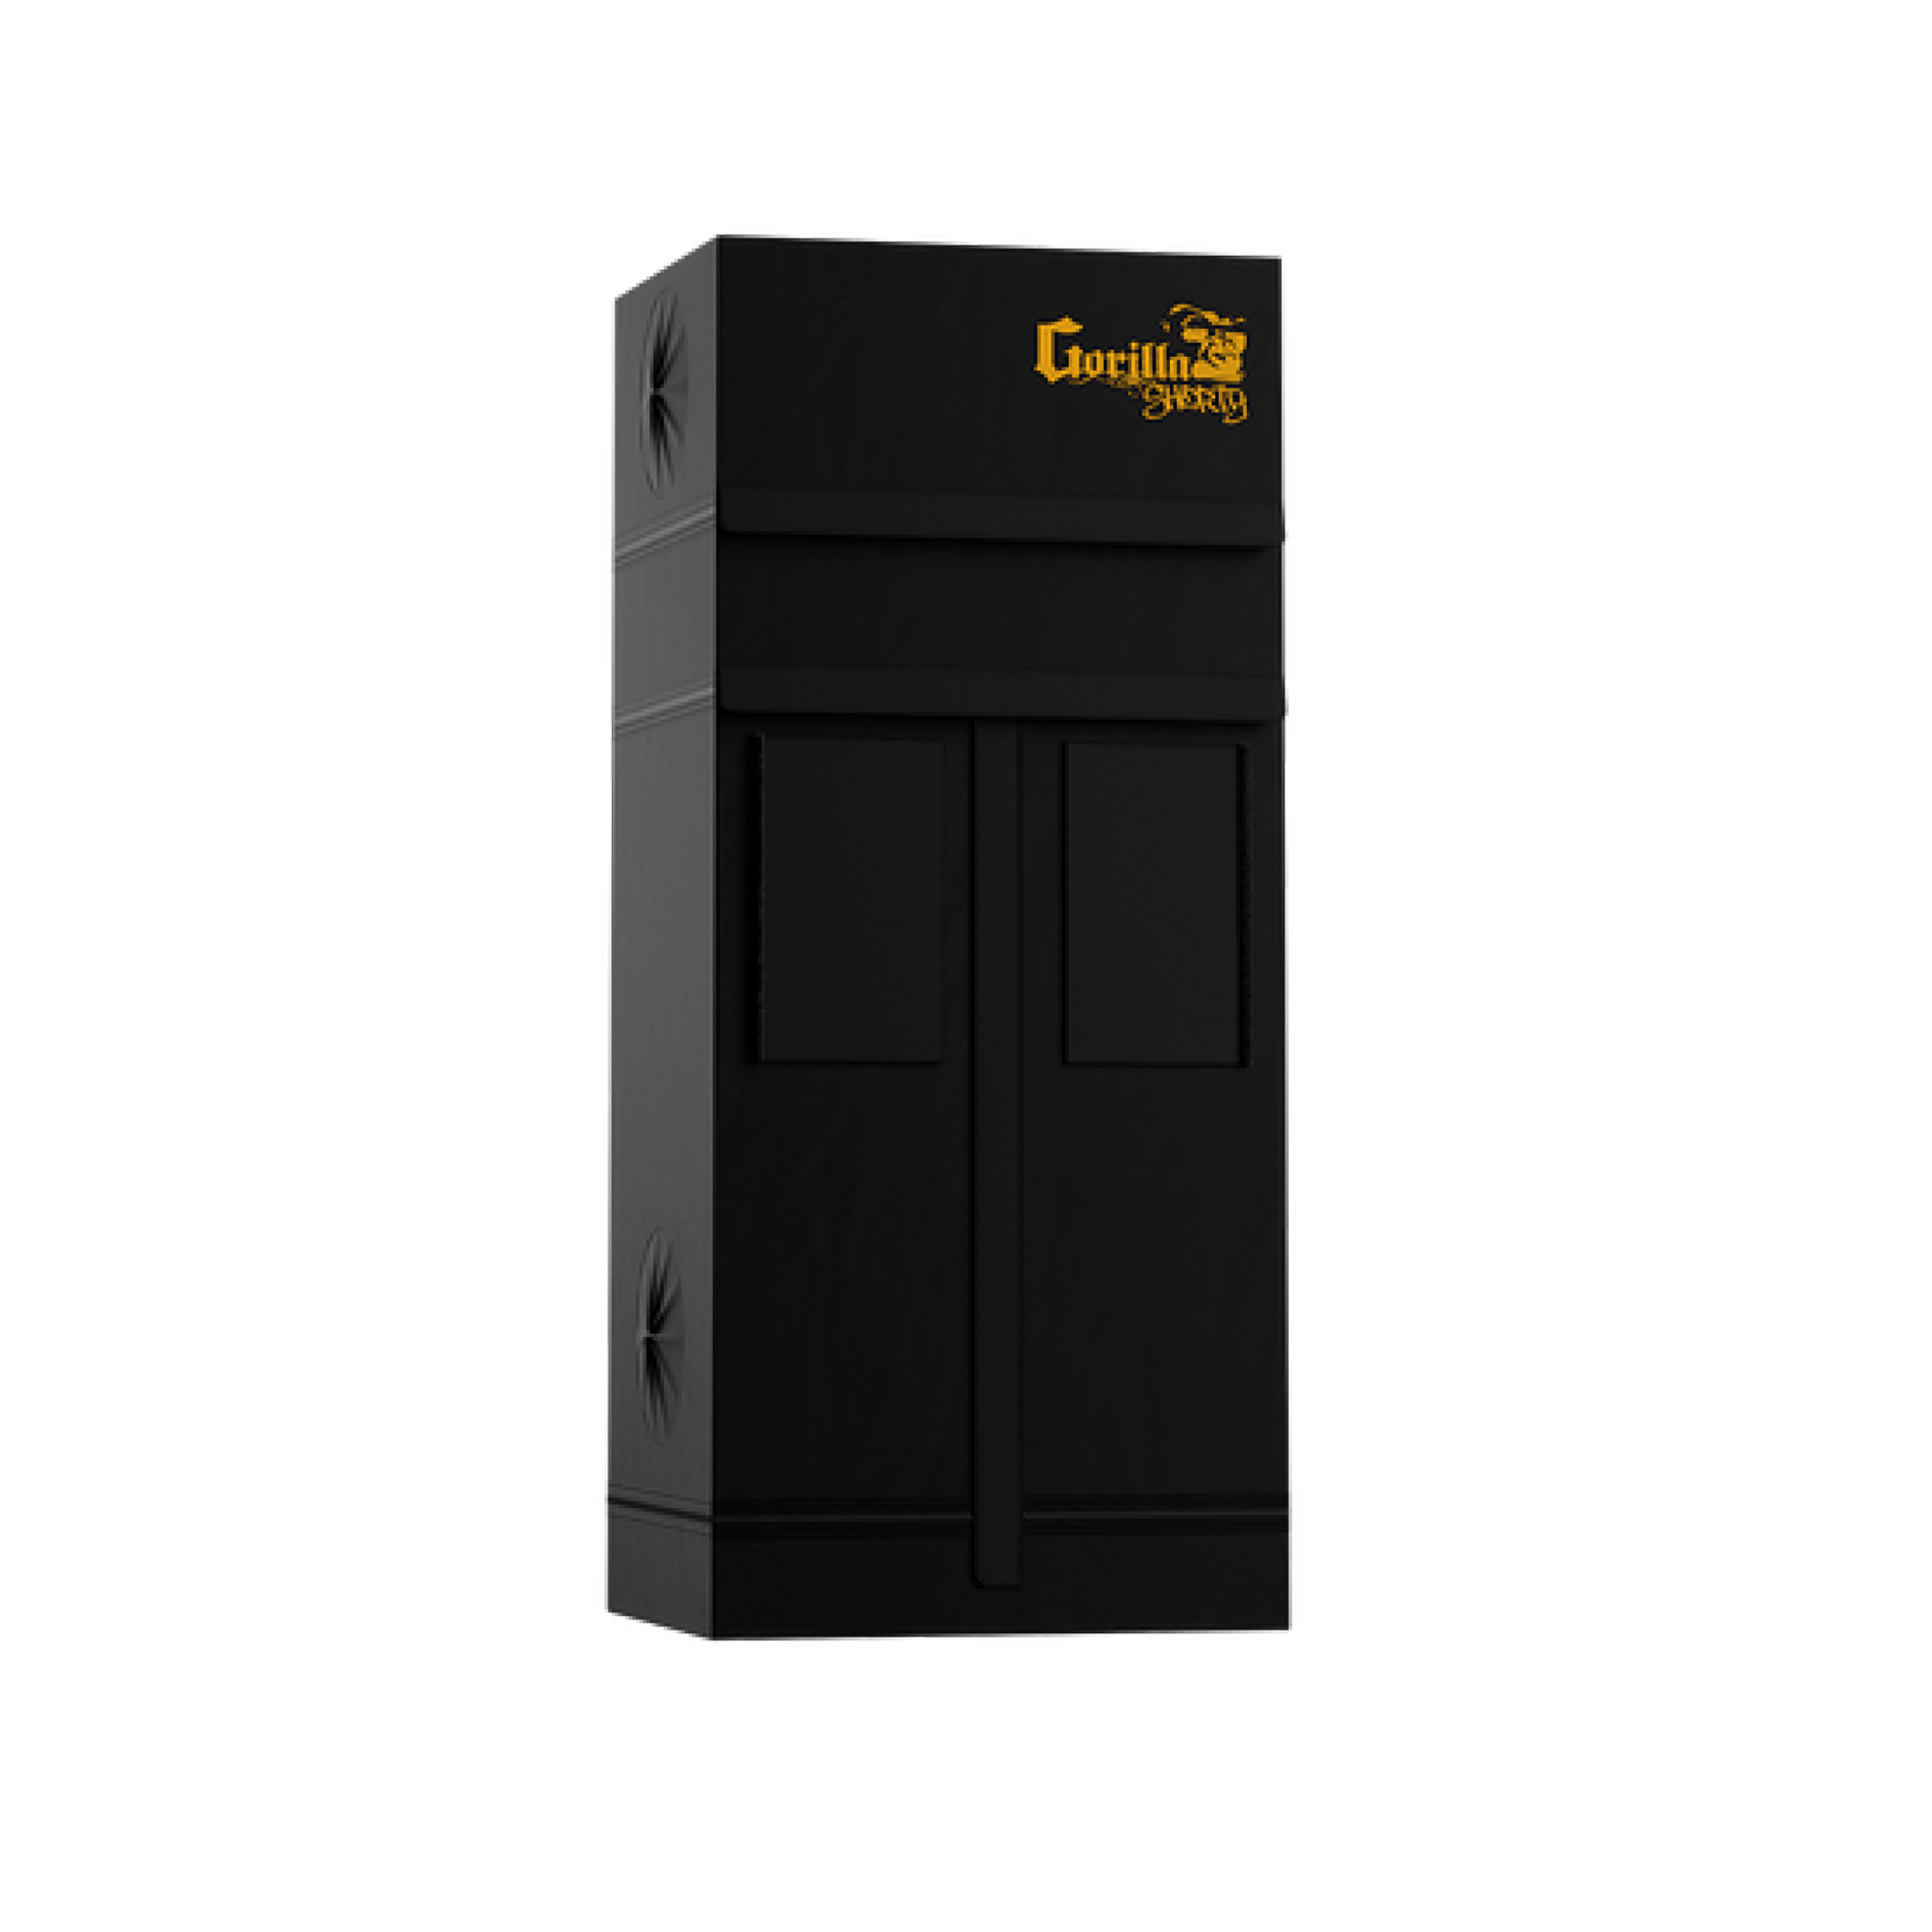 gorilla Gorilla Shorty Grow Tent 2 x 2.5ft (150CM to 172CM Tall) - Best for Low Ceilings!